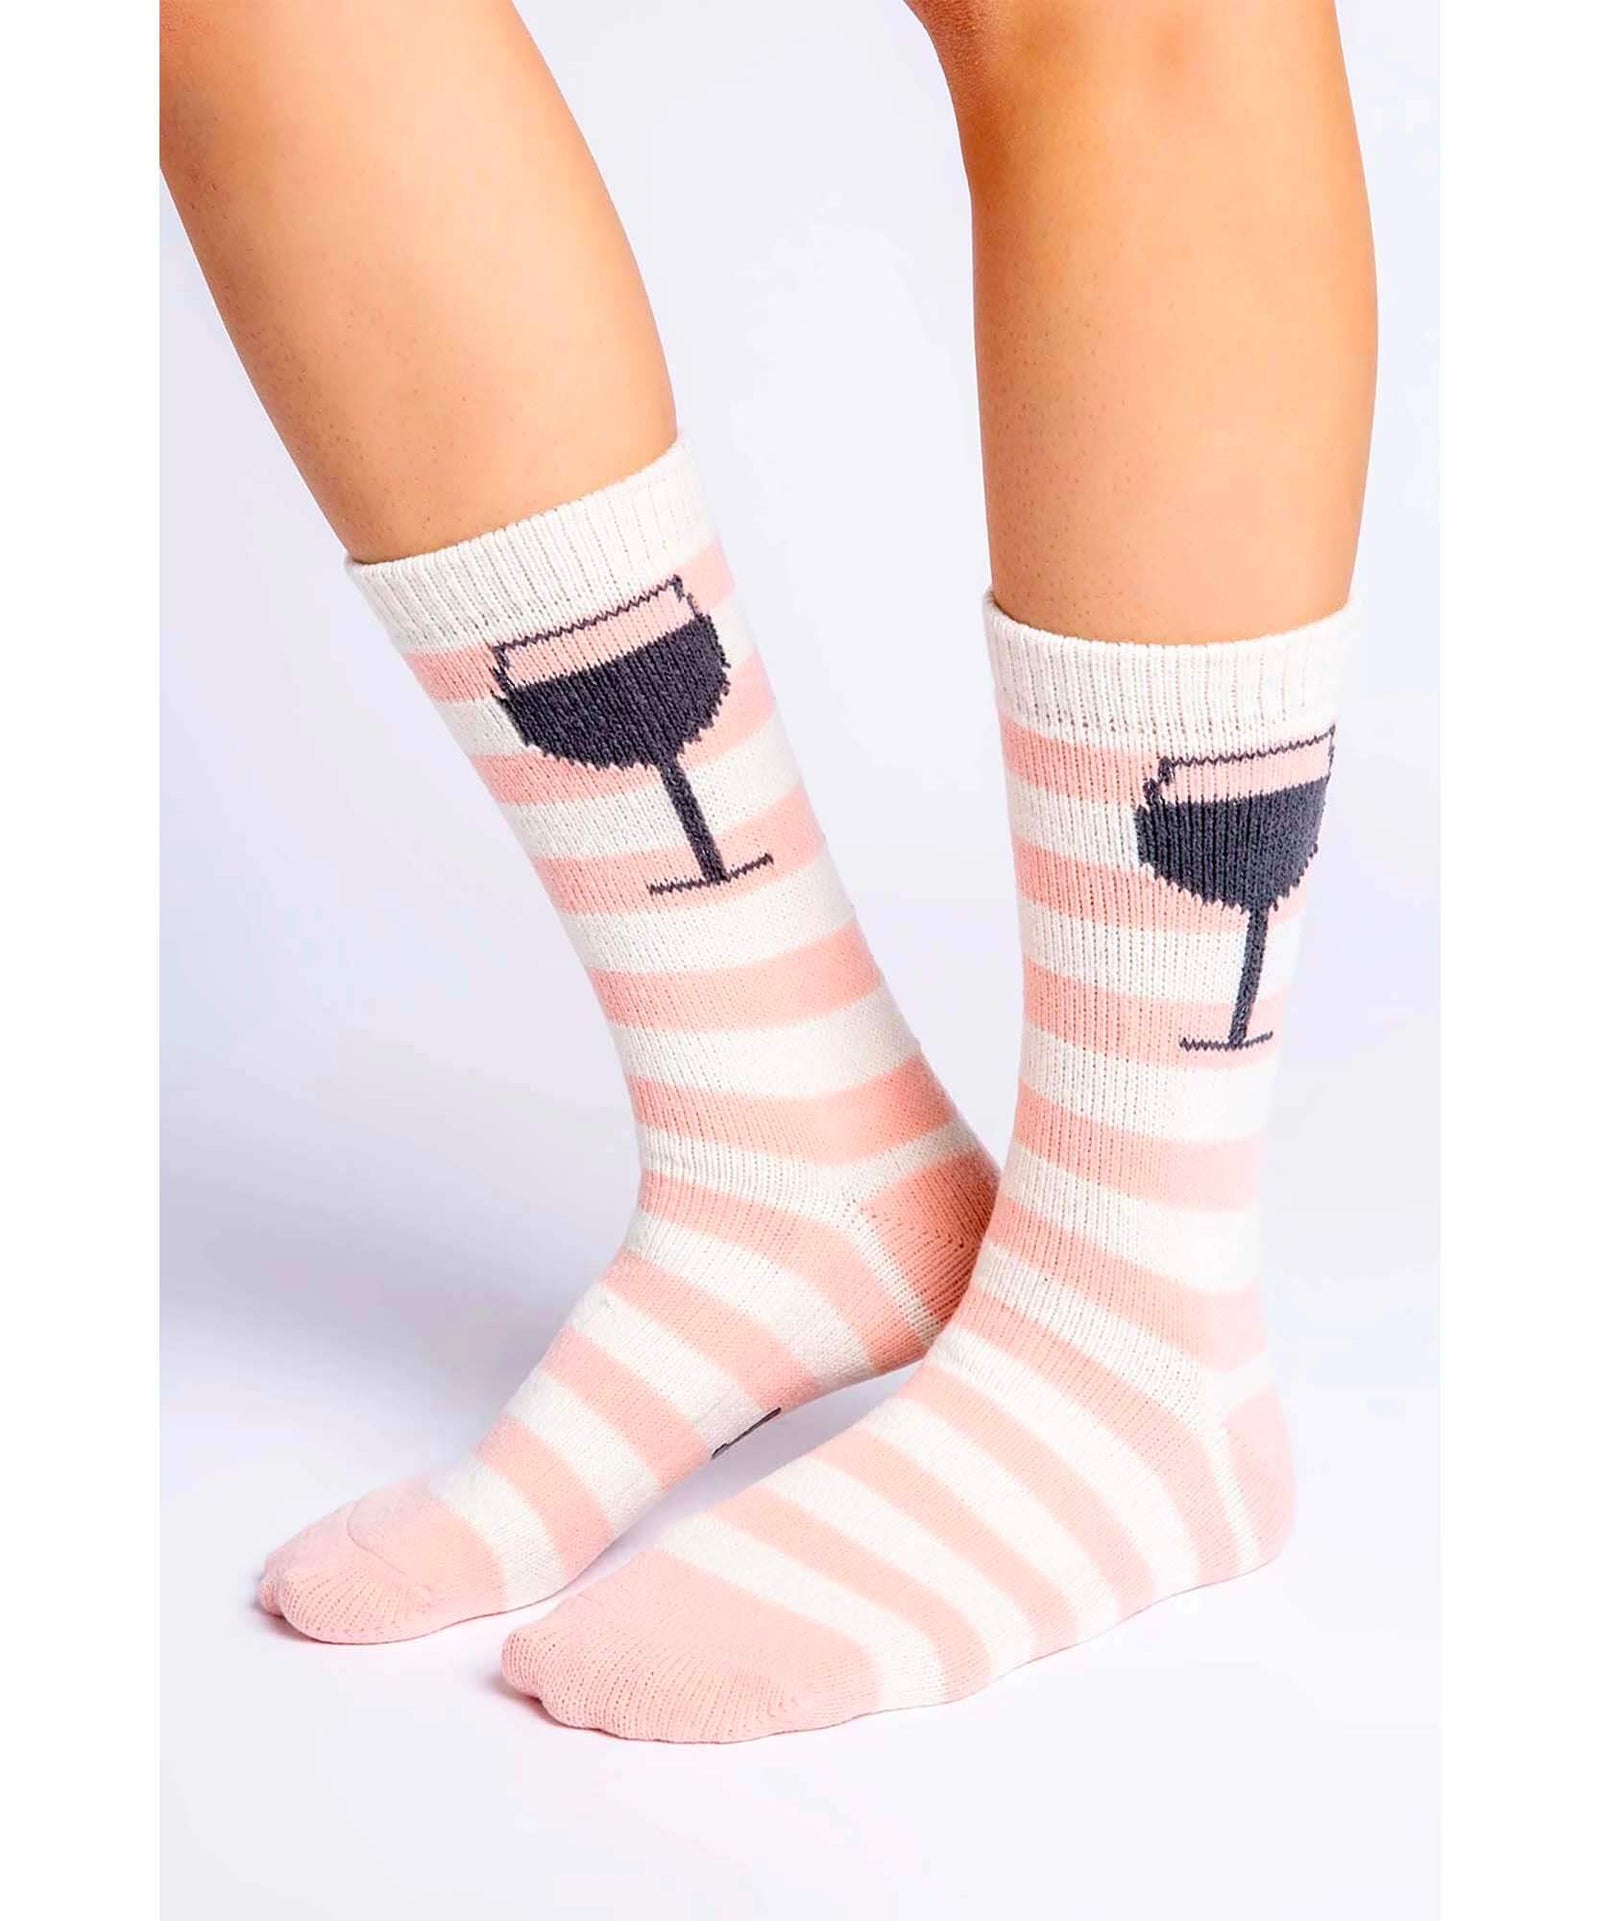 'I Don't Give A Sip' Socks